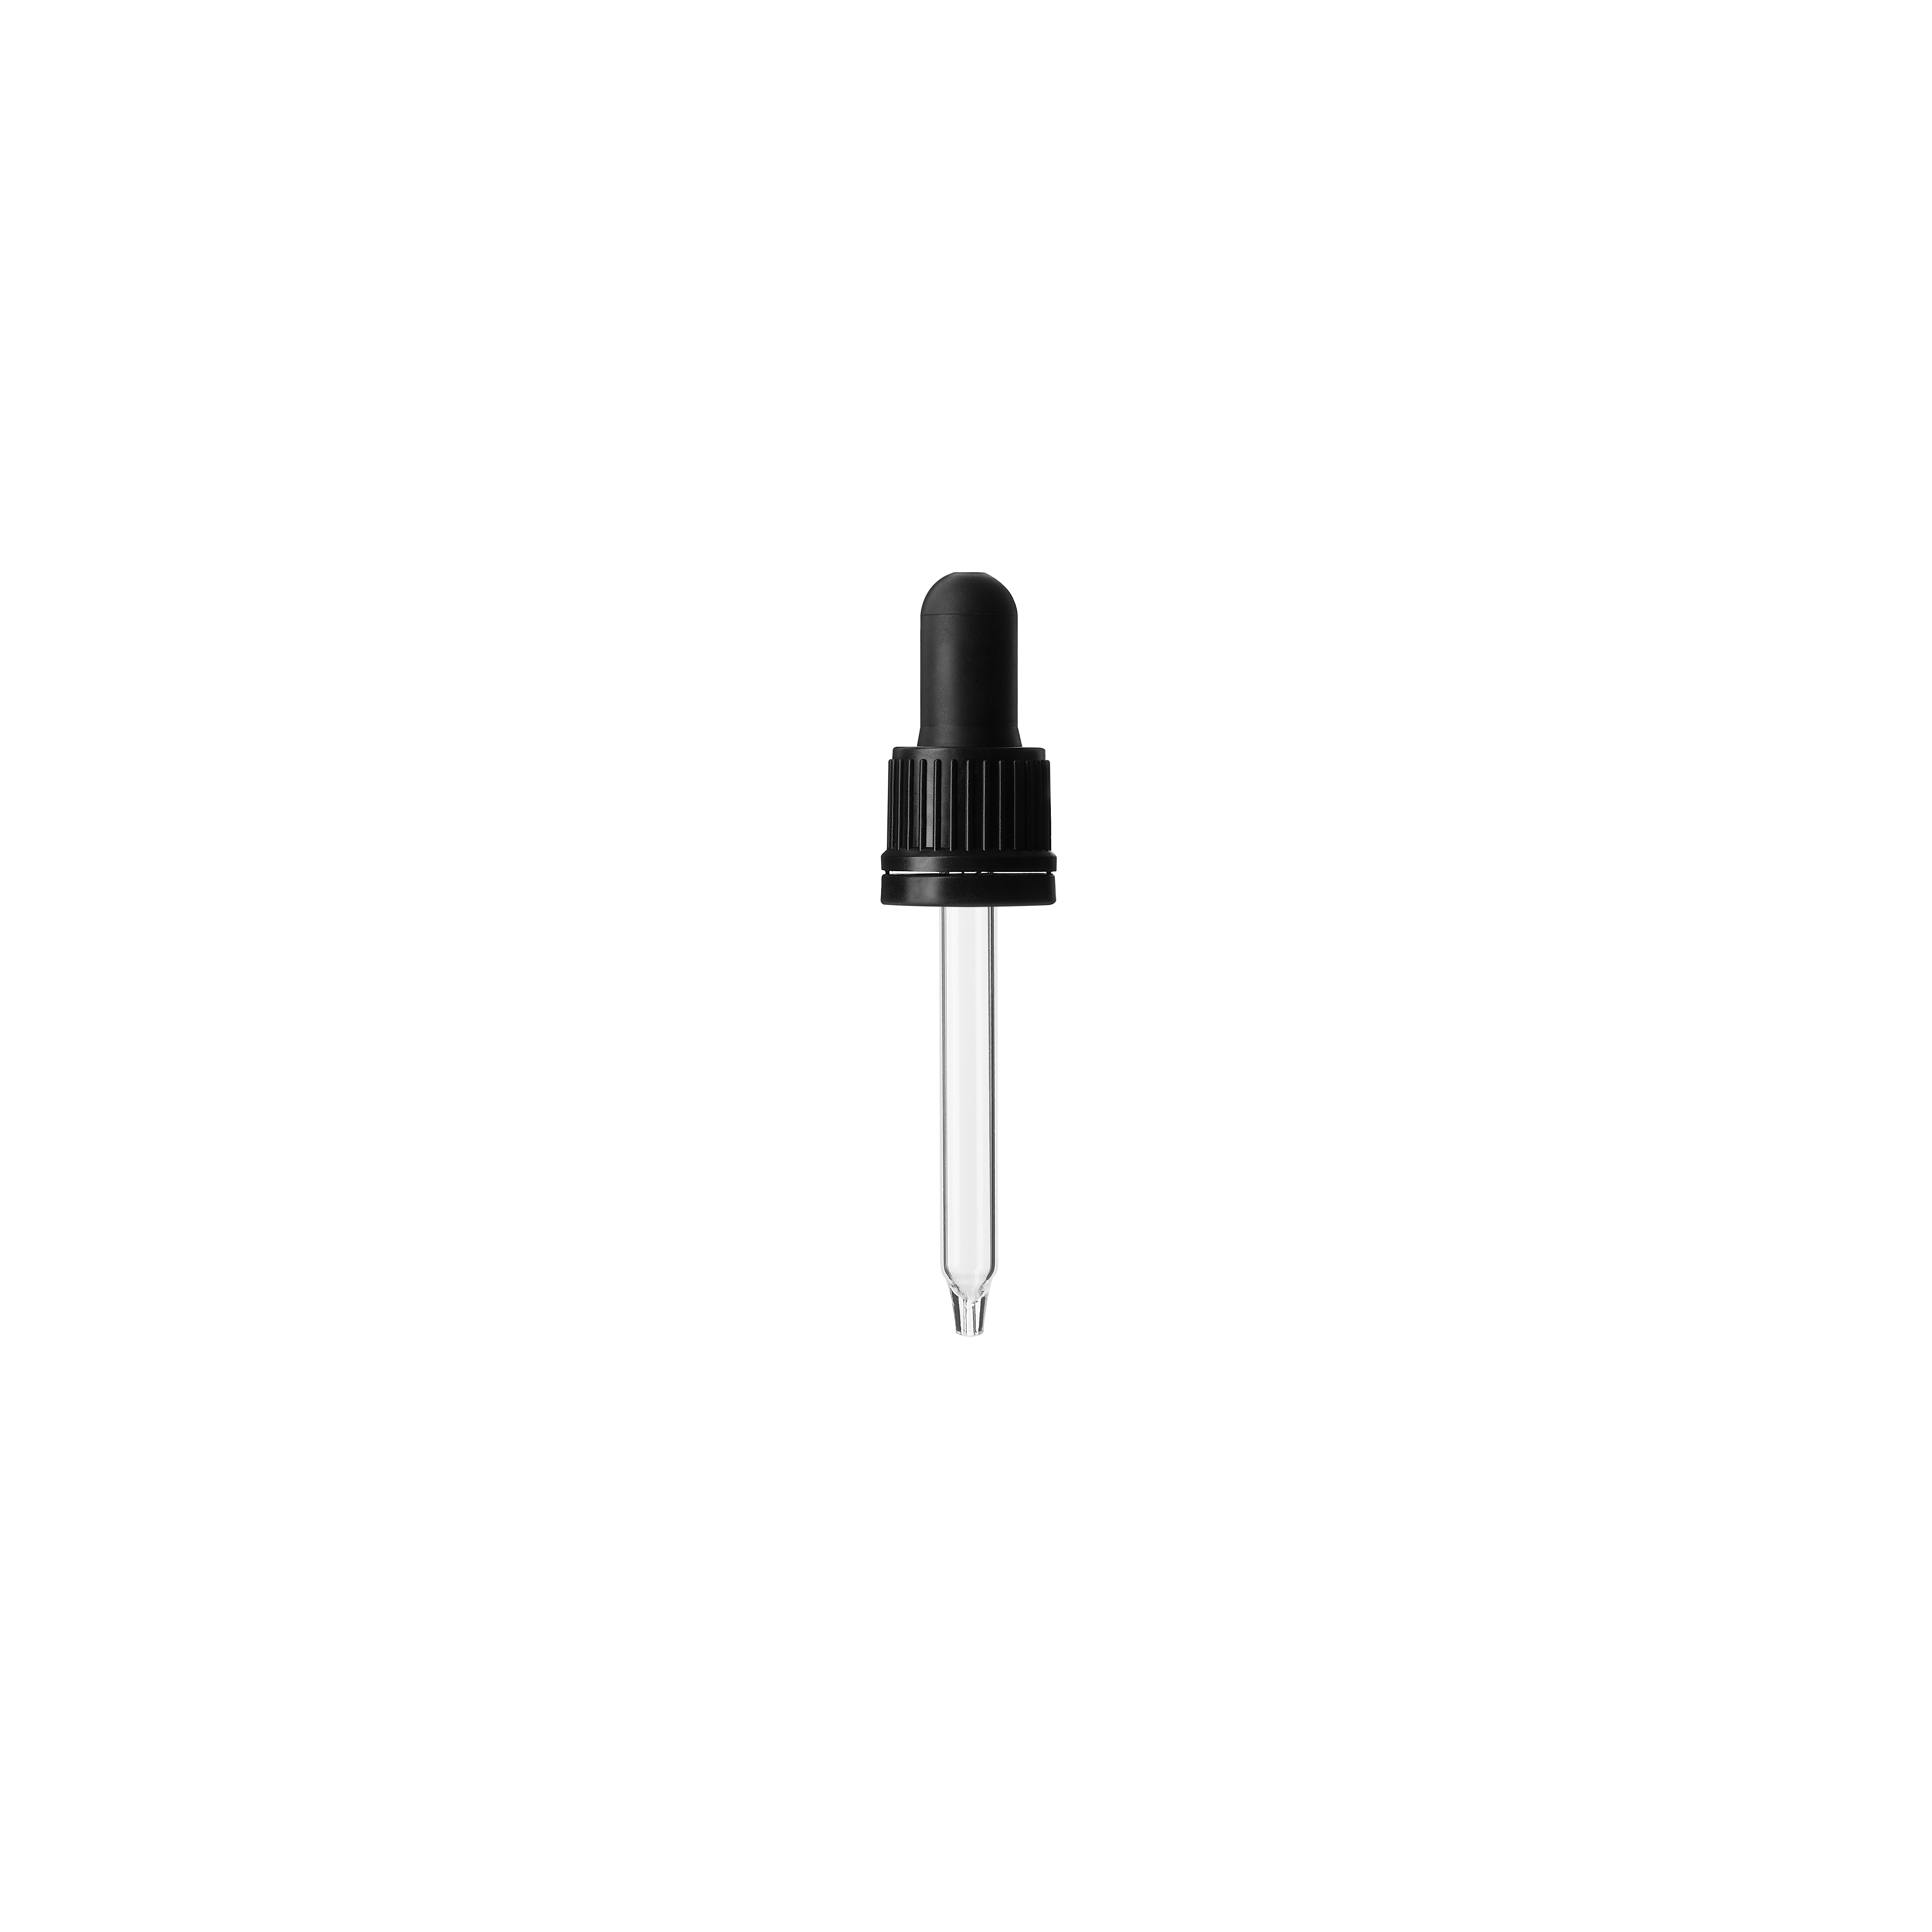 Child-resistant pipette series II, DIN18, tamper-evident, PP/PEHD, black, fine ribbed, black bulb TPE 1.0 ml, conical tip with 1.0 opening for Ginger 30 ml